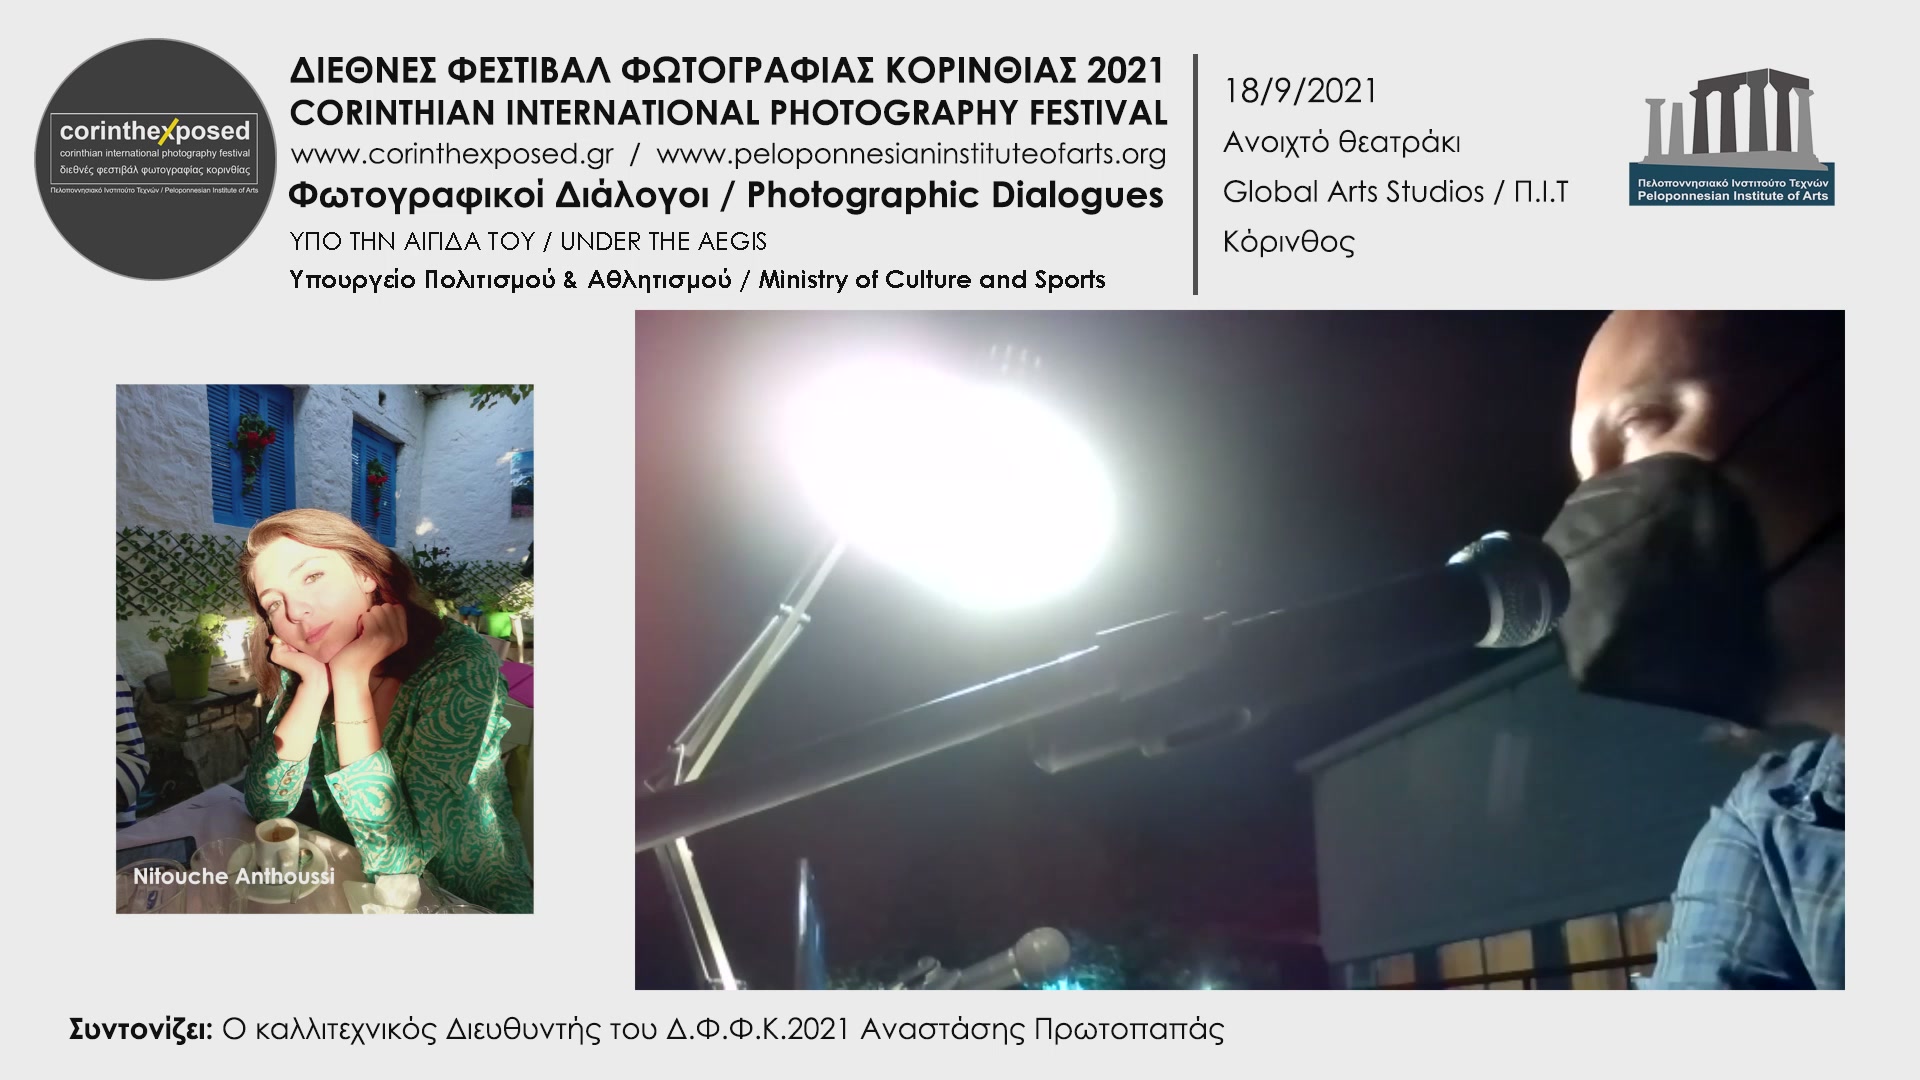 Nitouche Anthouche - Photographic dialogs 2021 (video)